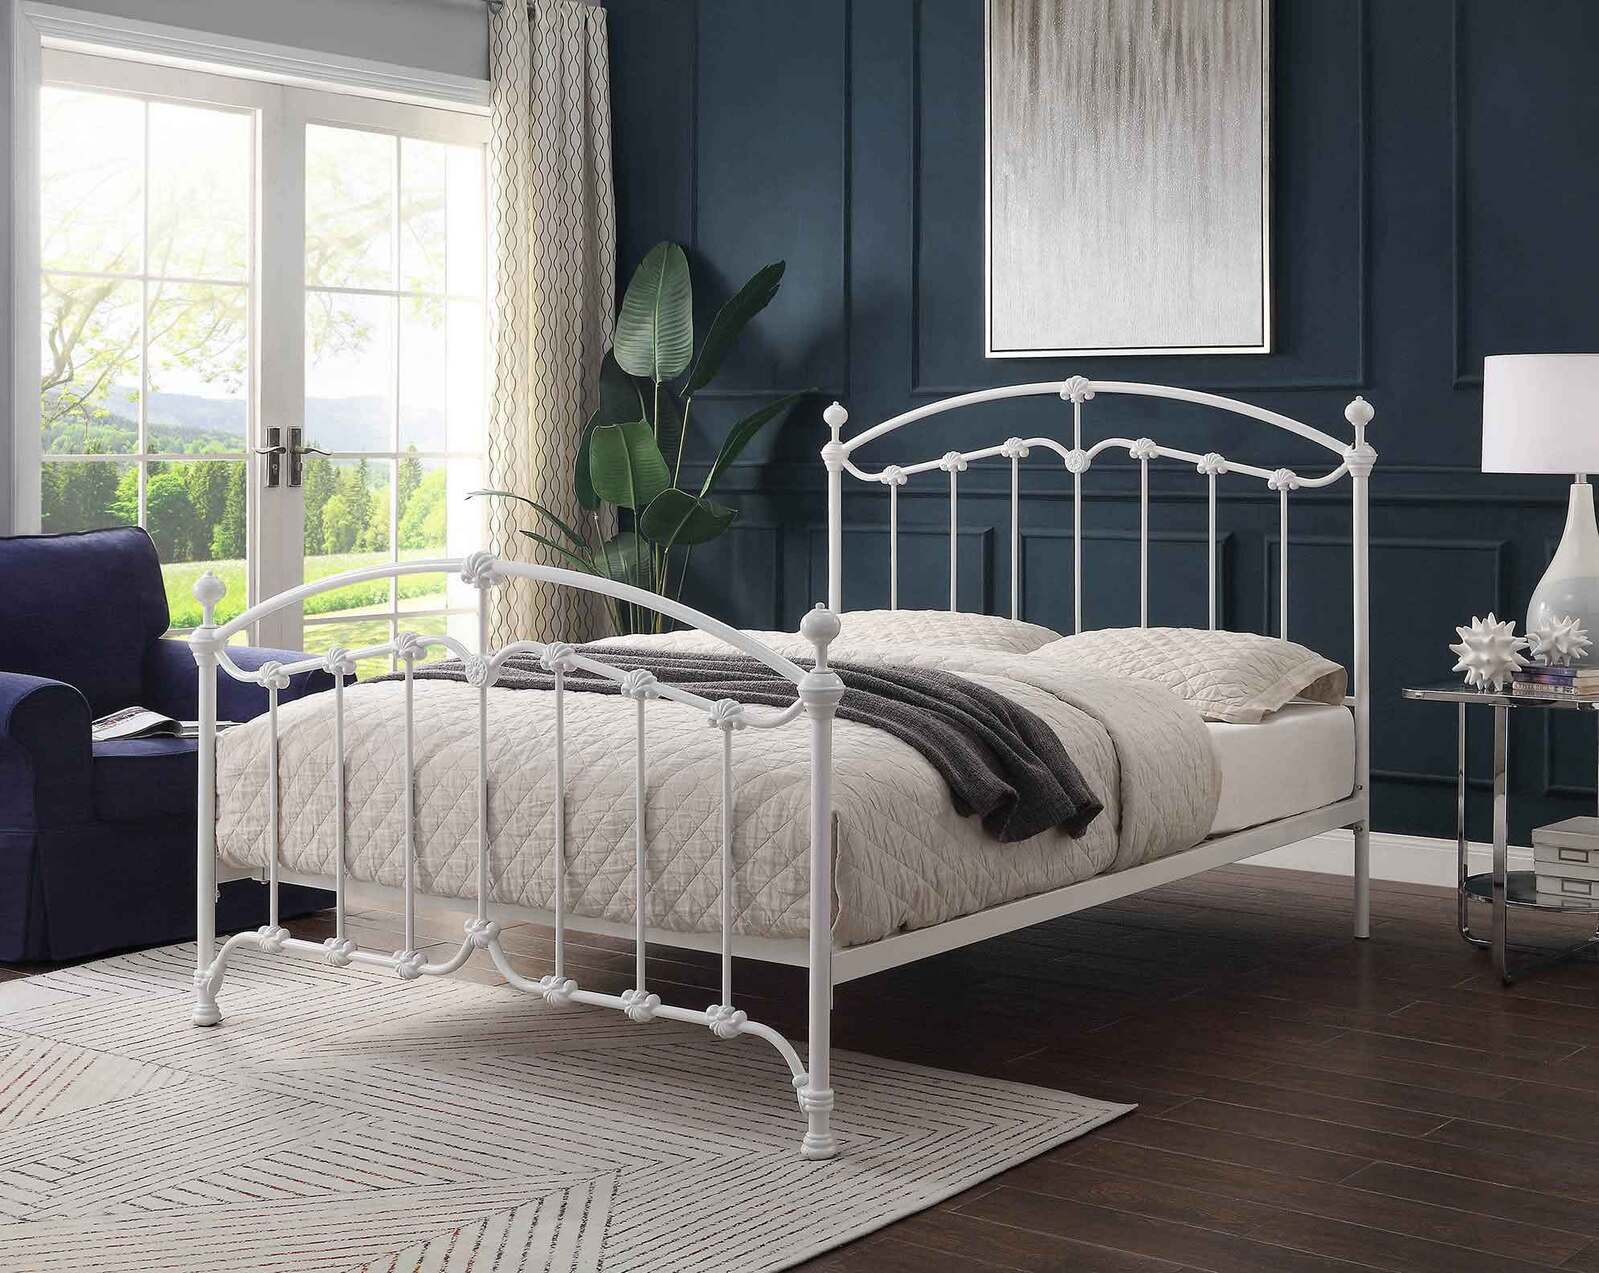 white wrought iron bed and mattress